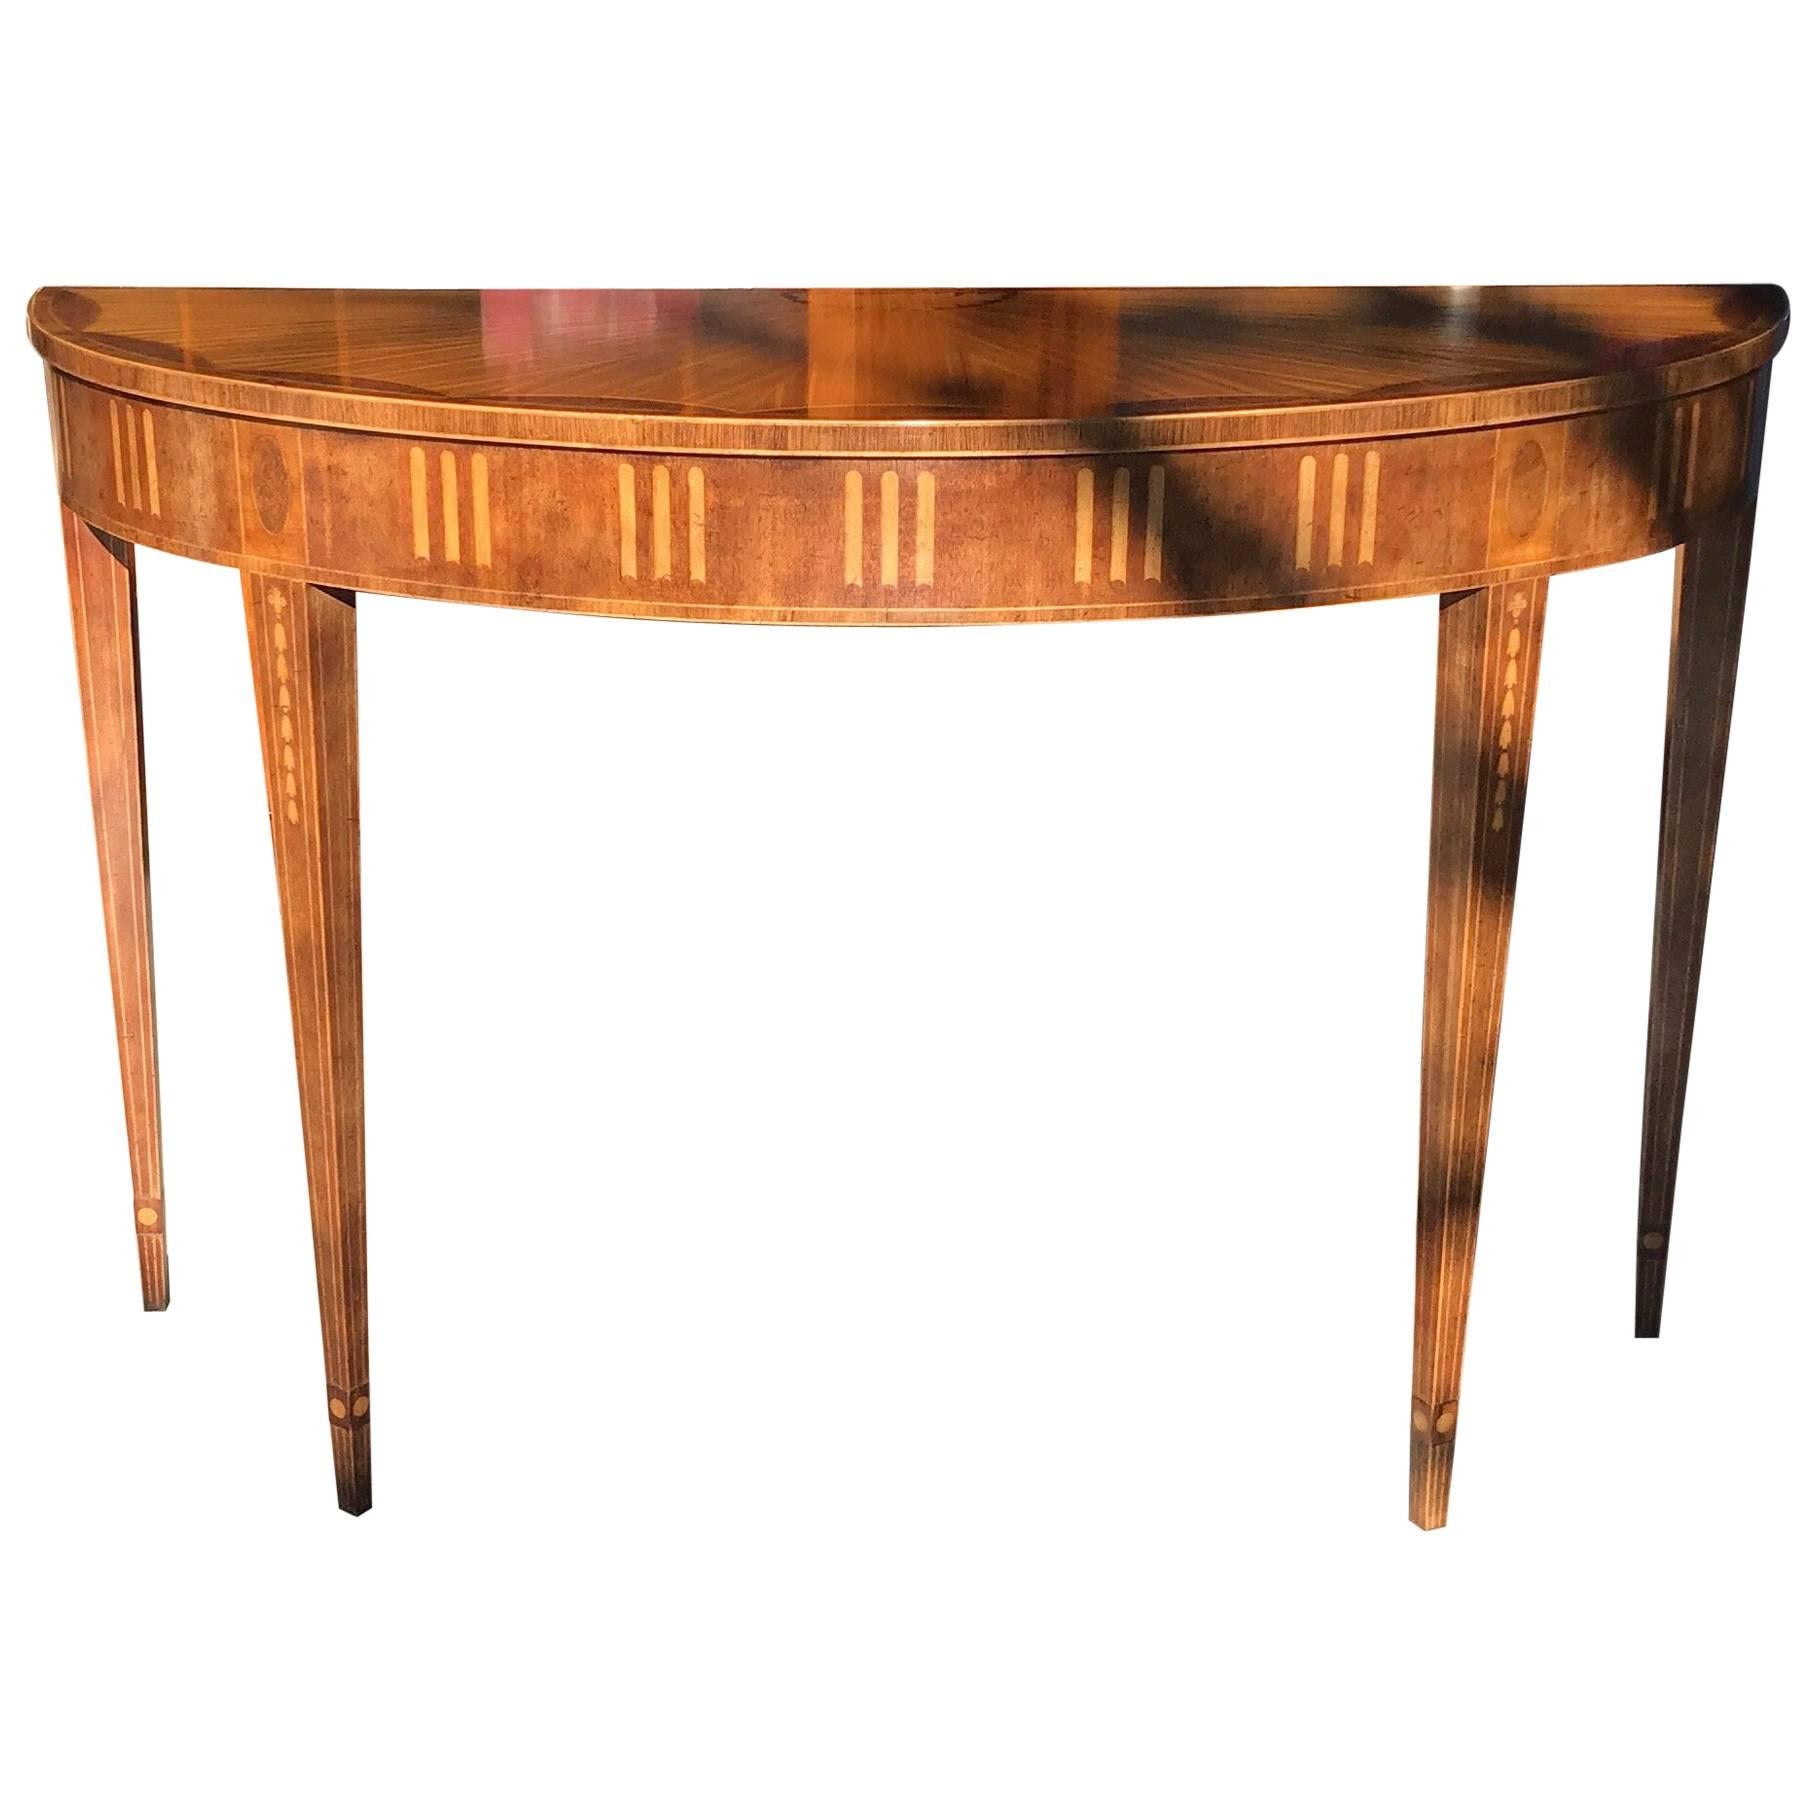 English Adam Style Inlaid Demilune Console Table by Baker